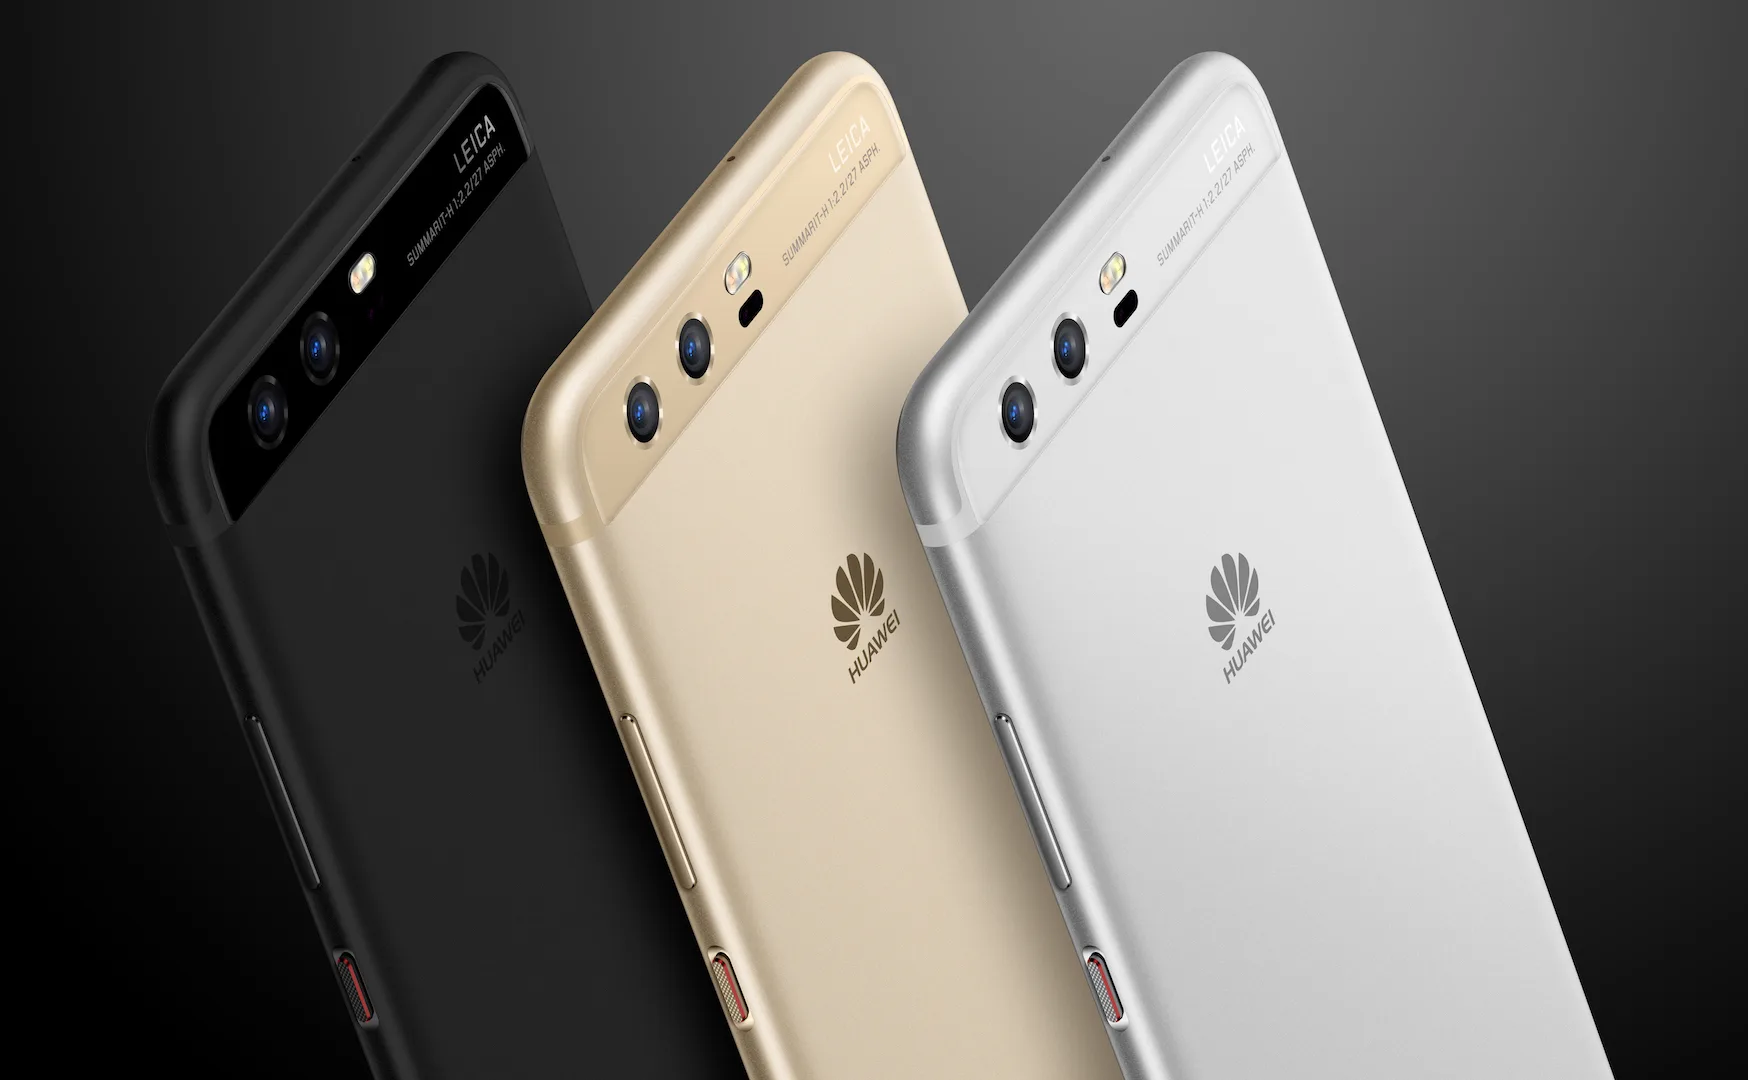 huawei_p10_black_gold_silver_group_chassis